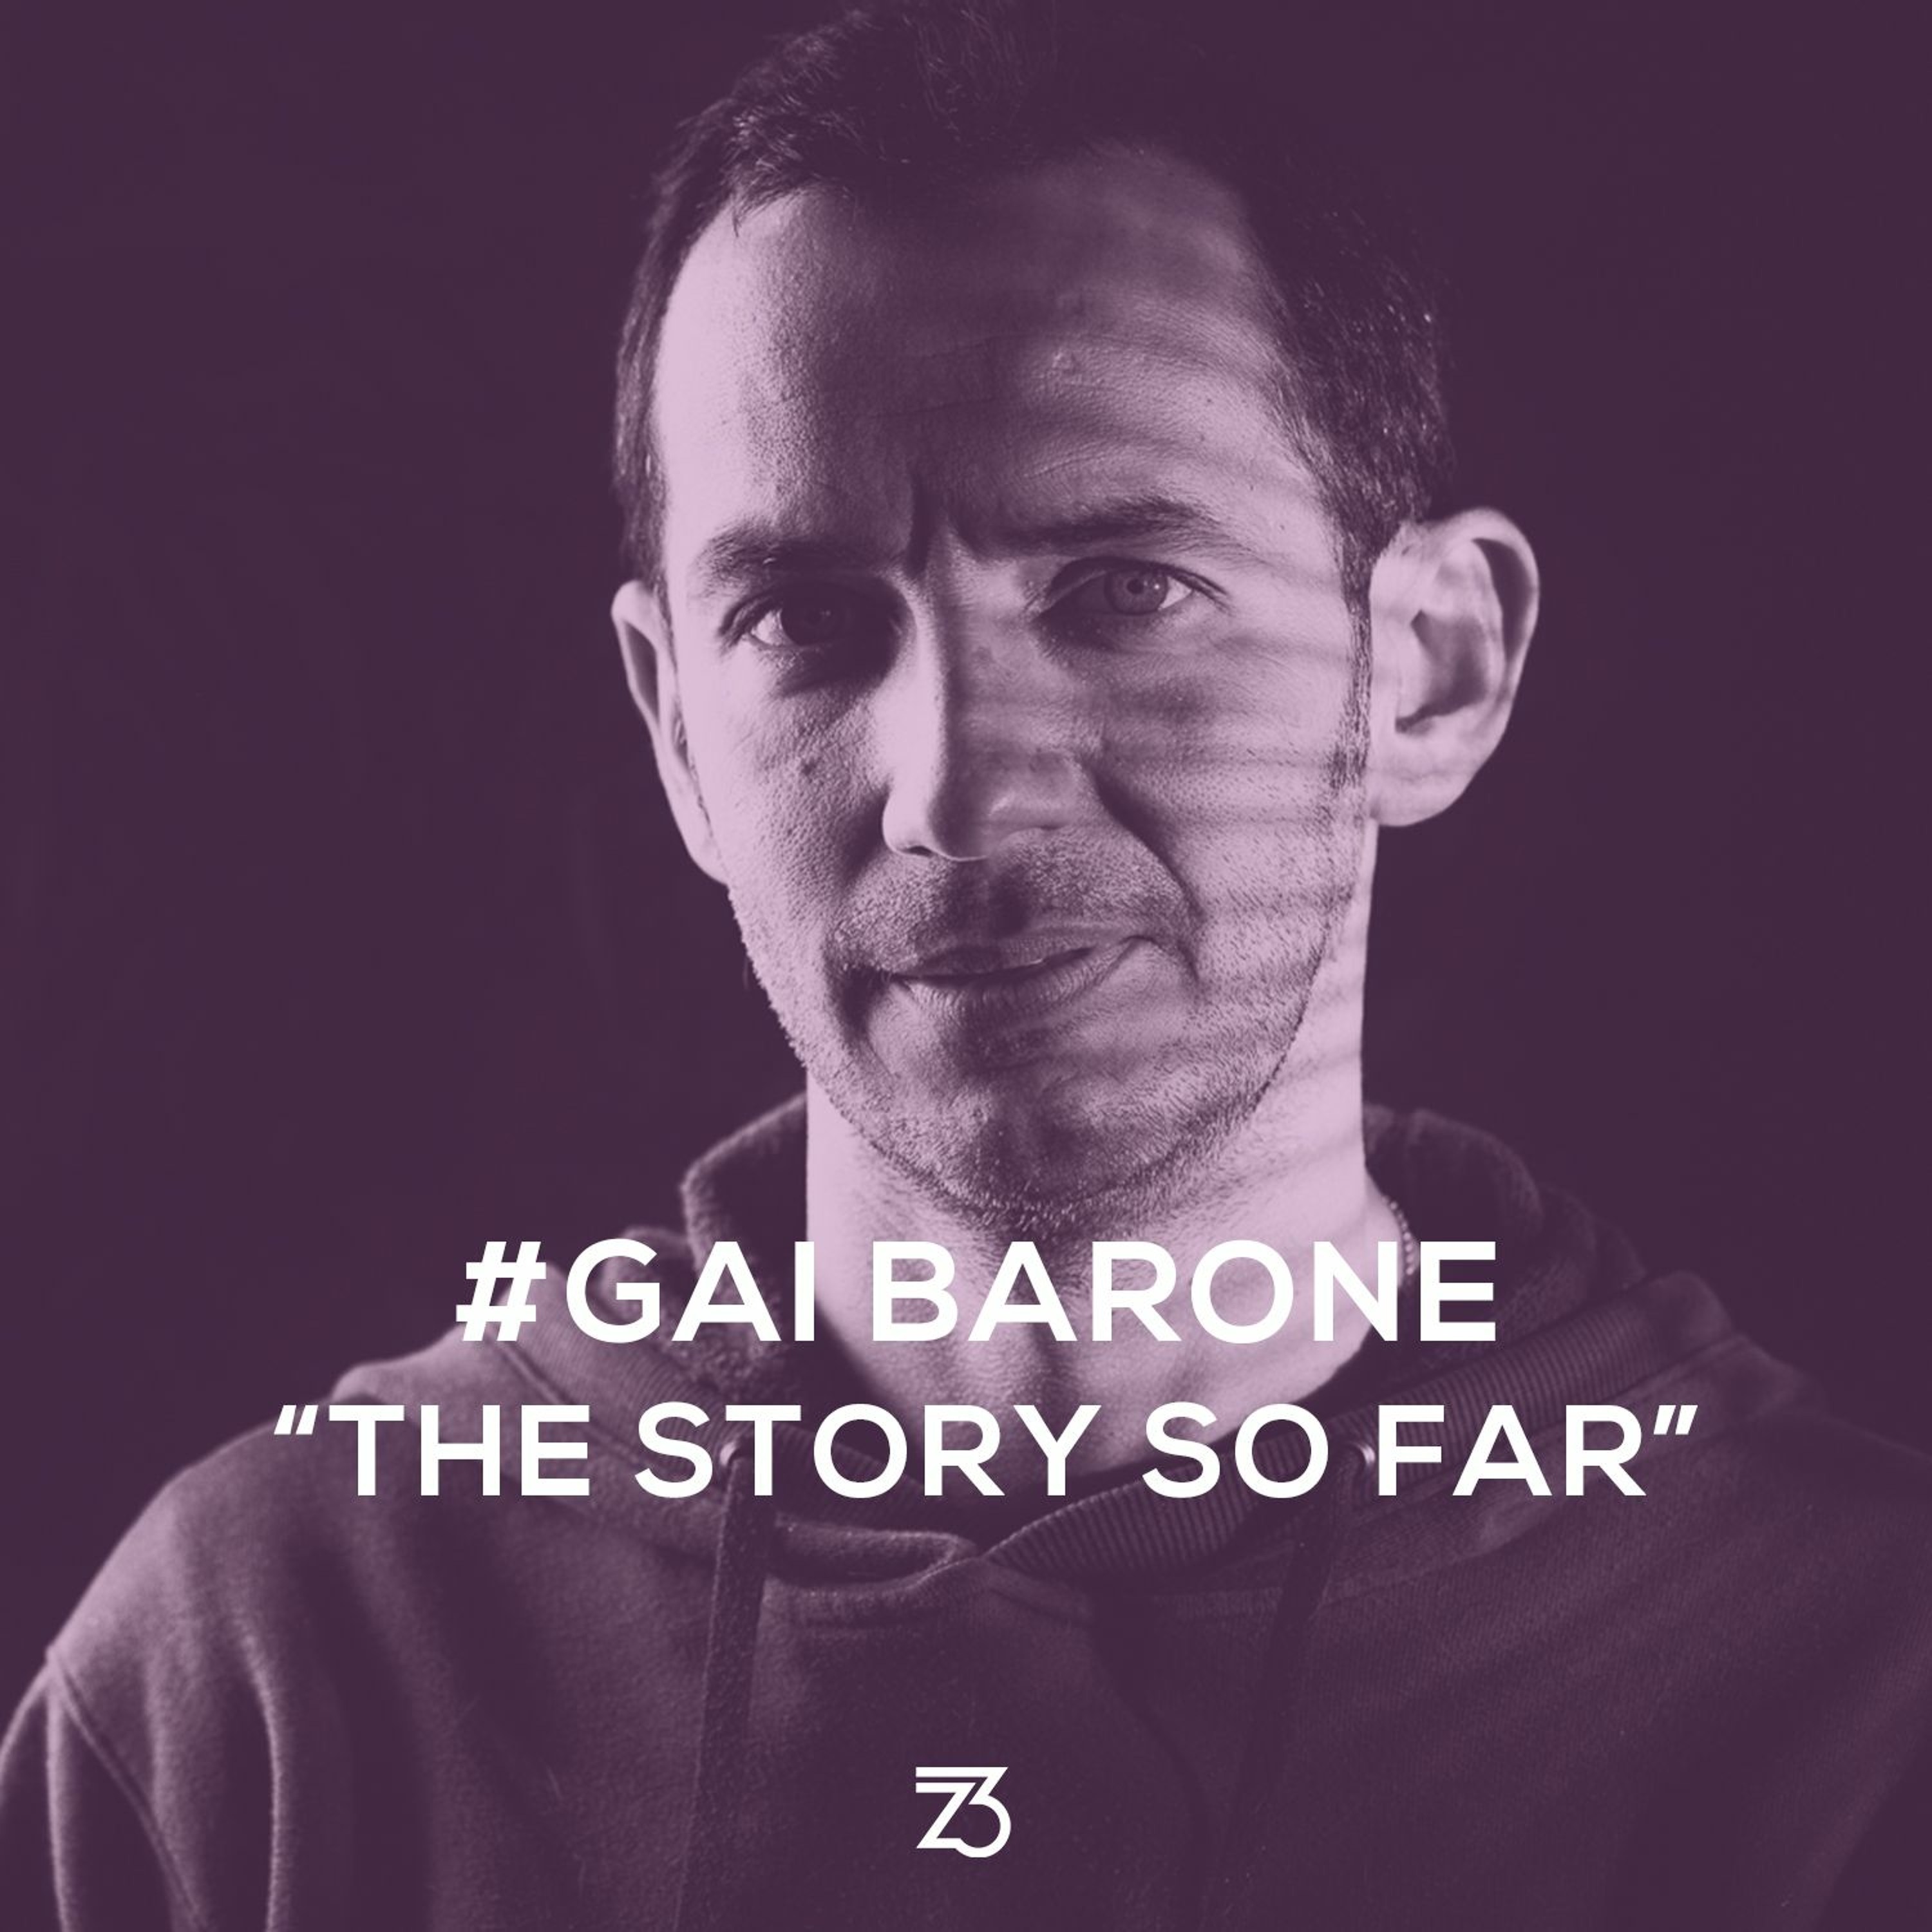 Gai Barone The Story So Far Realprog Radio Presented By Jamie Zerothree Lyssna Har Poddtoppen Se I do love this video, in every single part, it's meaning, such a beauty!credits to oreste kessler for this!he made my kick maybe sounding even better. gai barone the story so far realprog radio presented by jamie zerothree lyssna har poddtoppen se